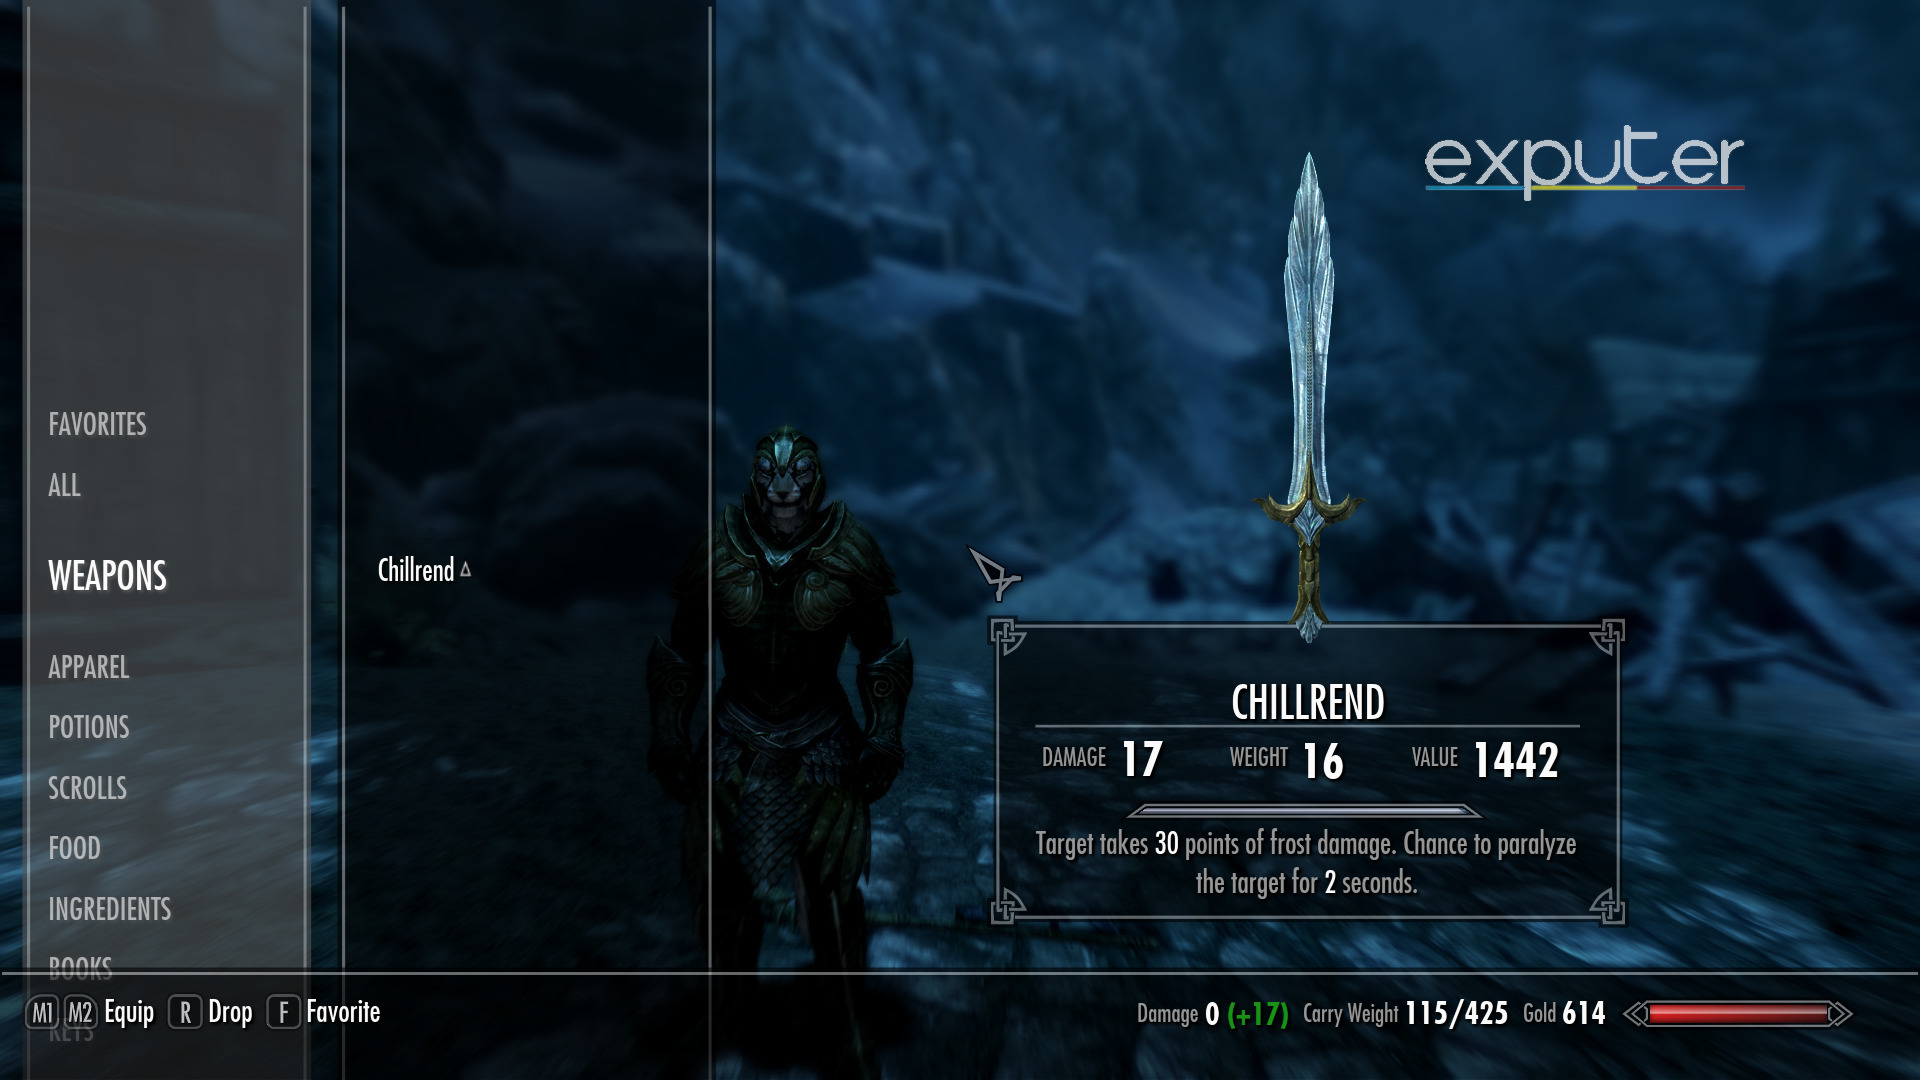 Most Powerful sword in skyrim special edition according to reddit.